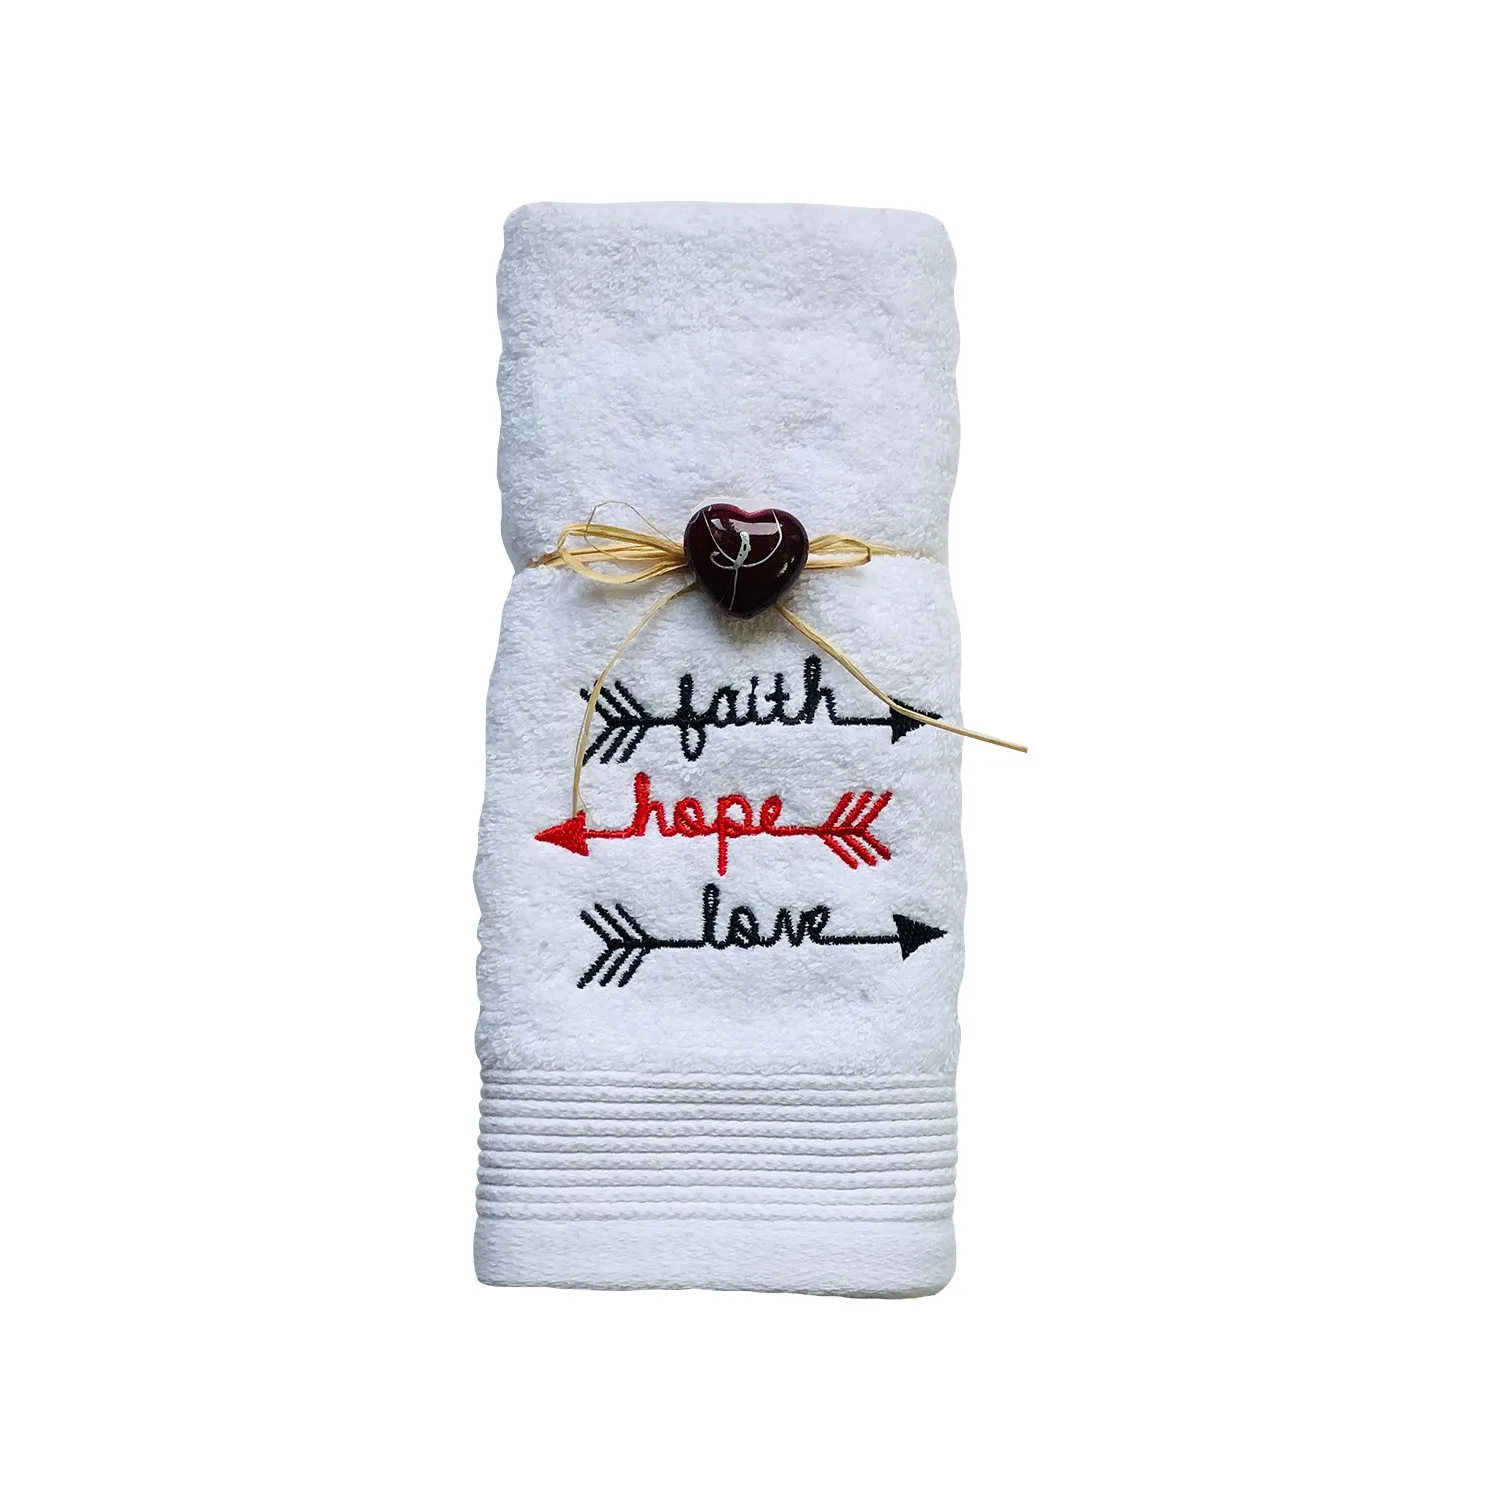 Faith embroidered hand towels / bath towels